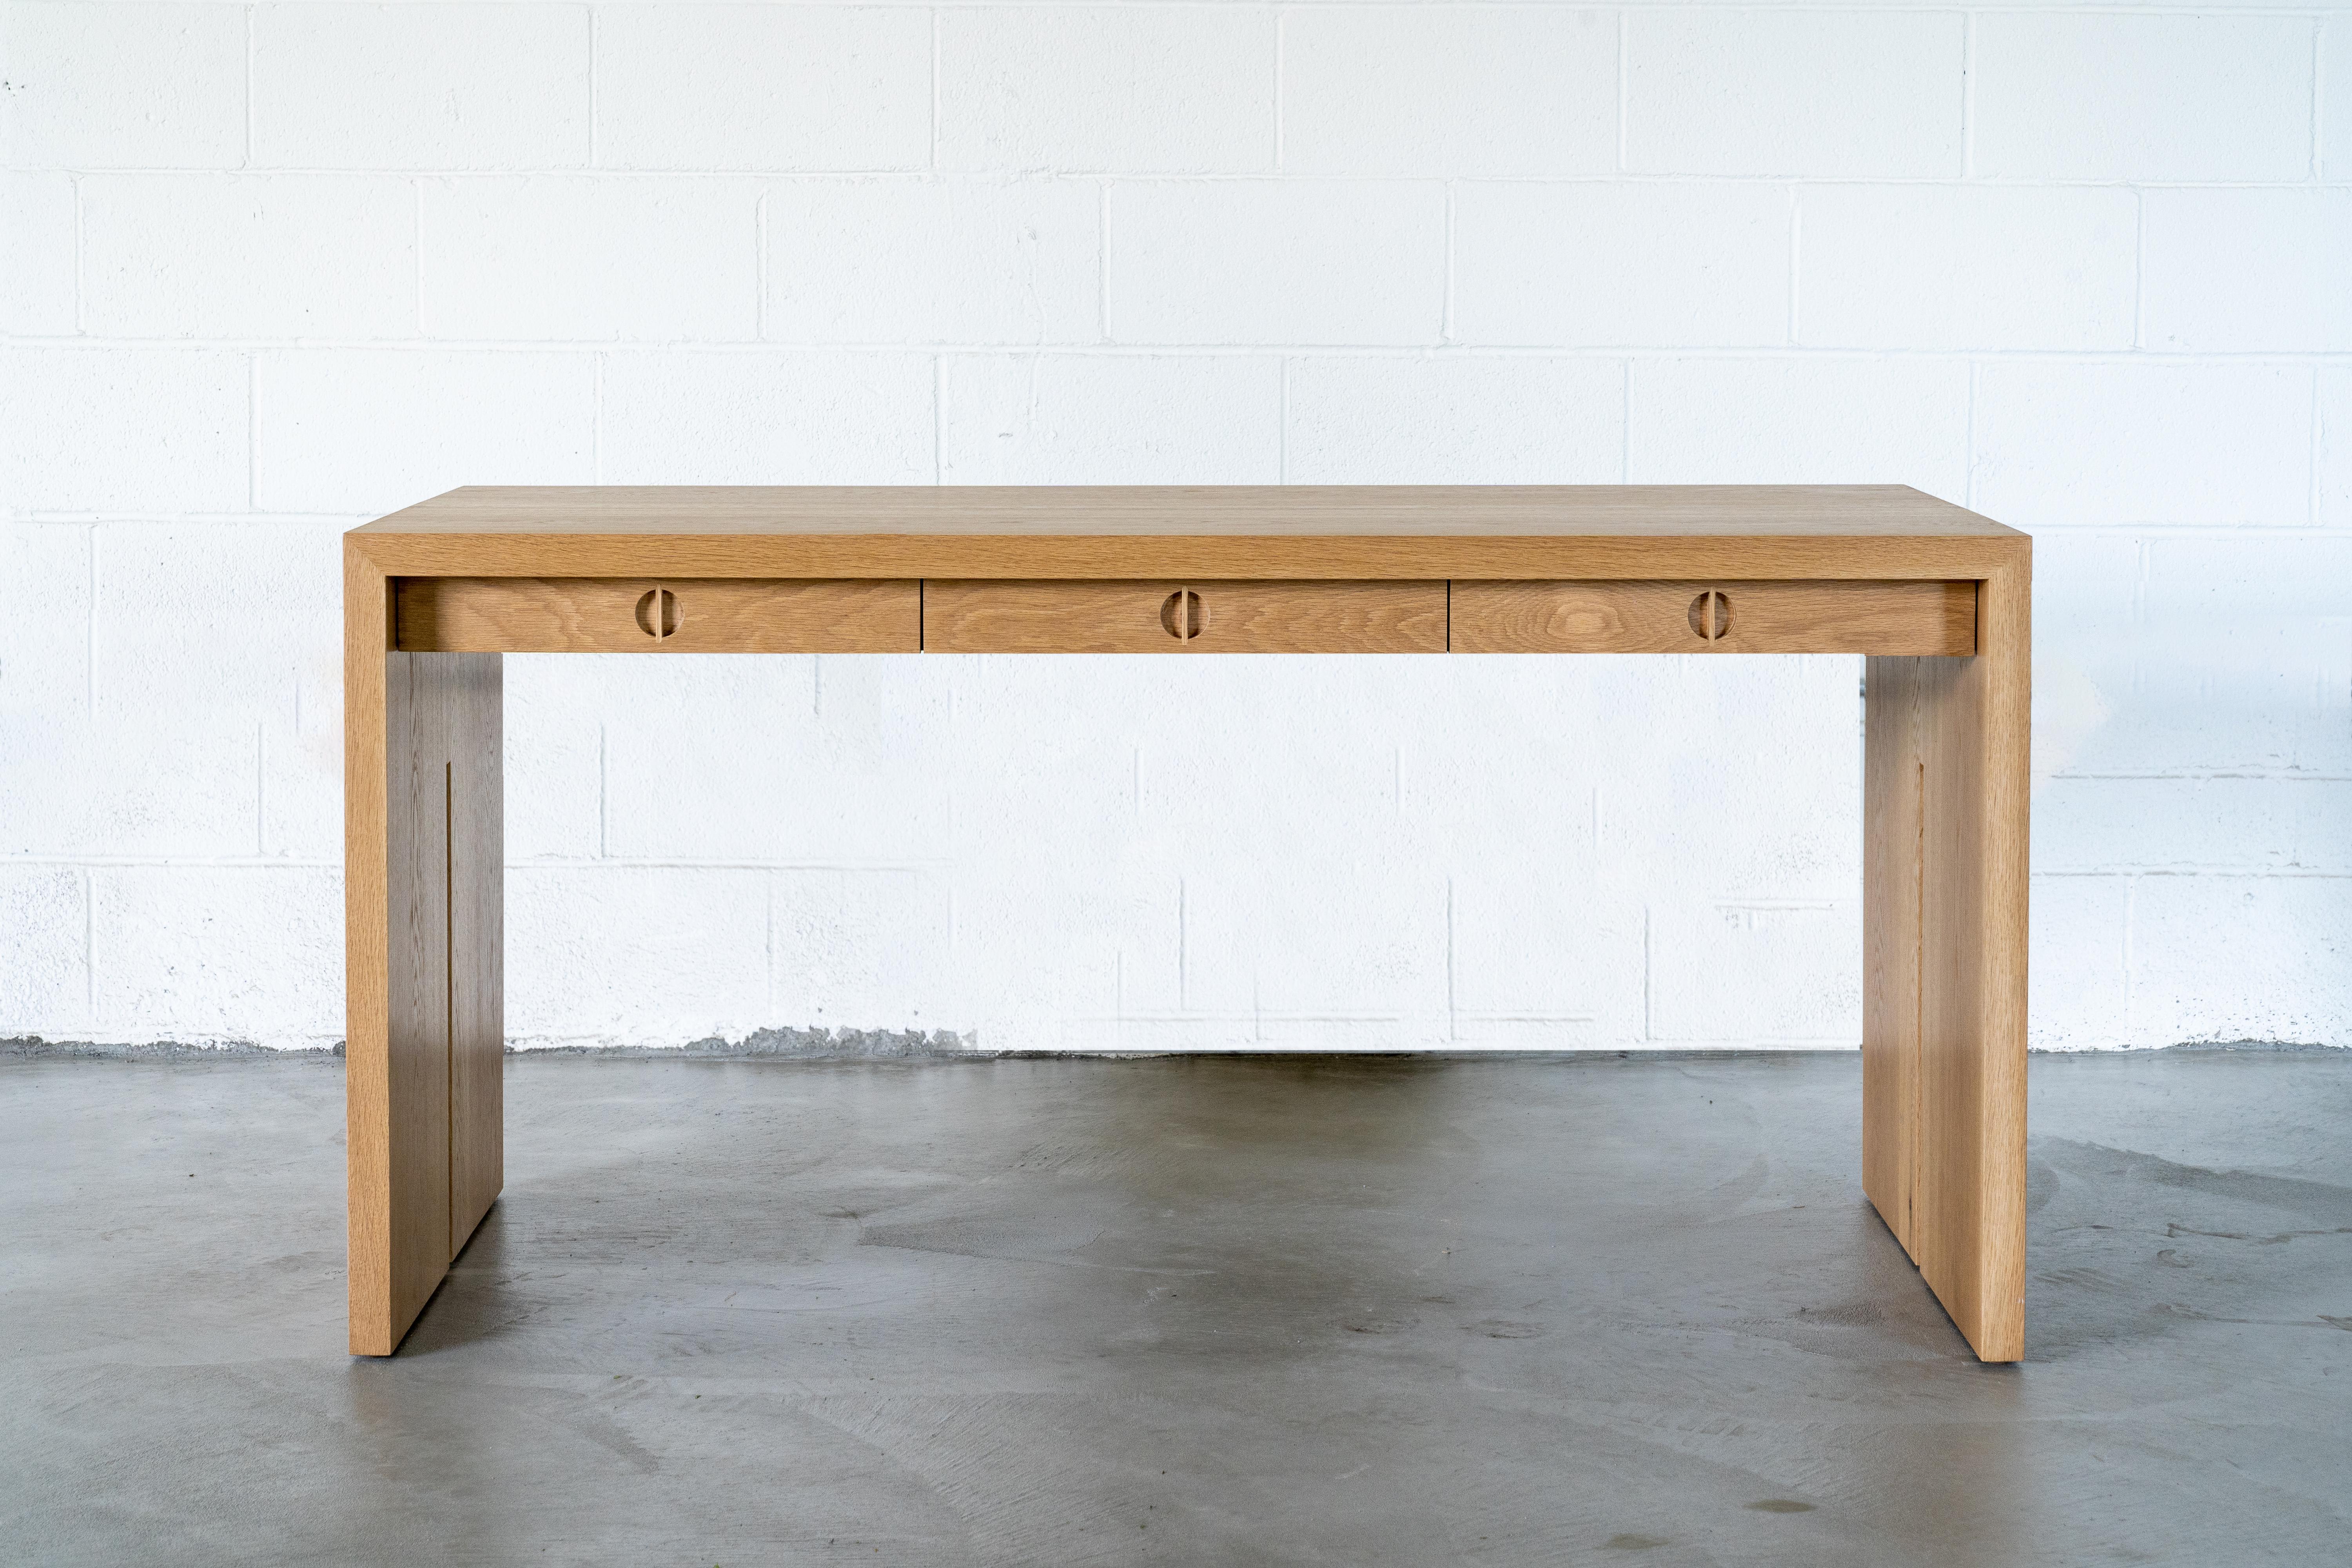 This custom wood desk is hand-made in the United States with all hardwood construction. This modern design is characterized by its solid white oak body, minimalist walnut inlay detail, and unique split leg detail. Convenient and accessible storage